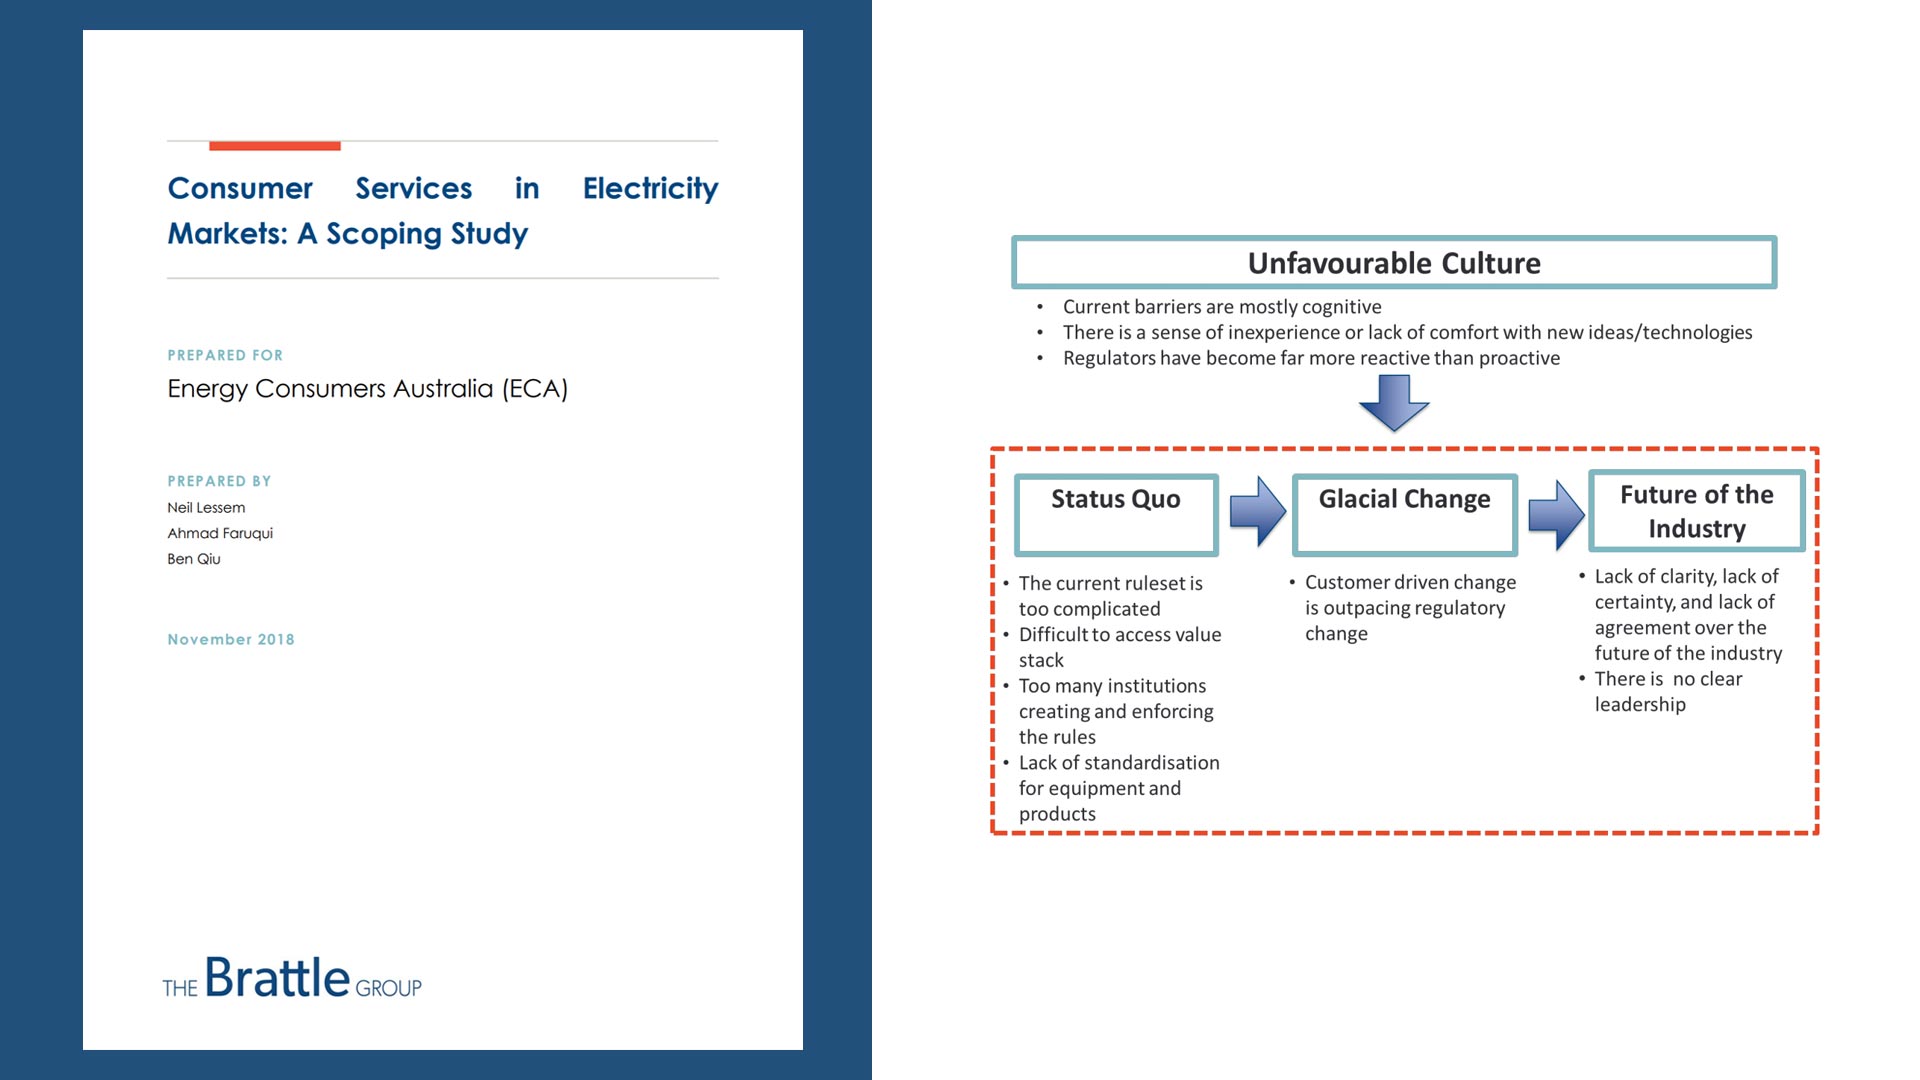 Consumer Services in Electricty Markets: A Scoping Study